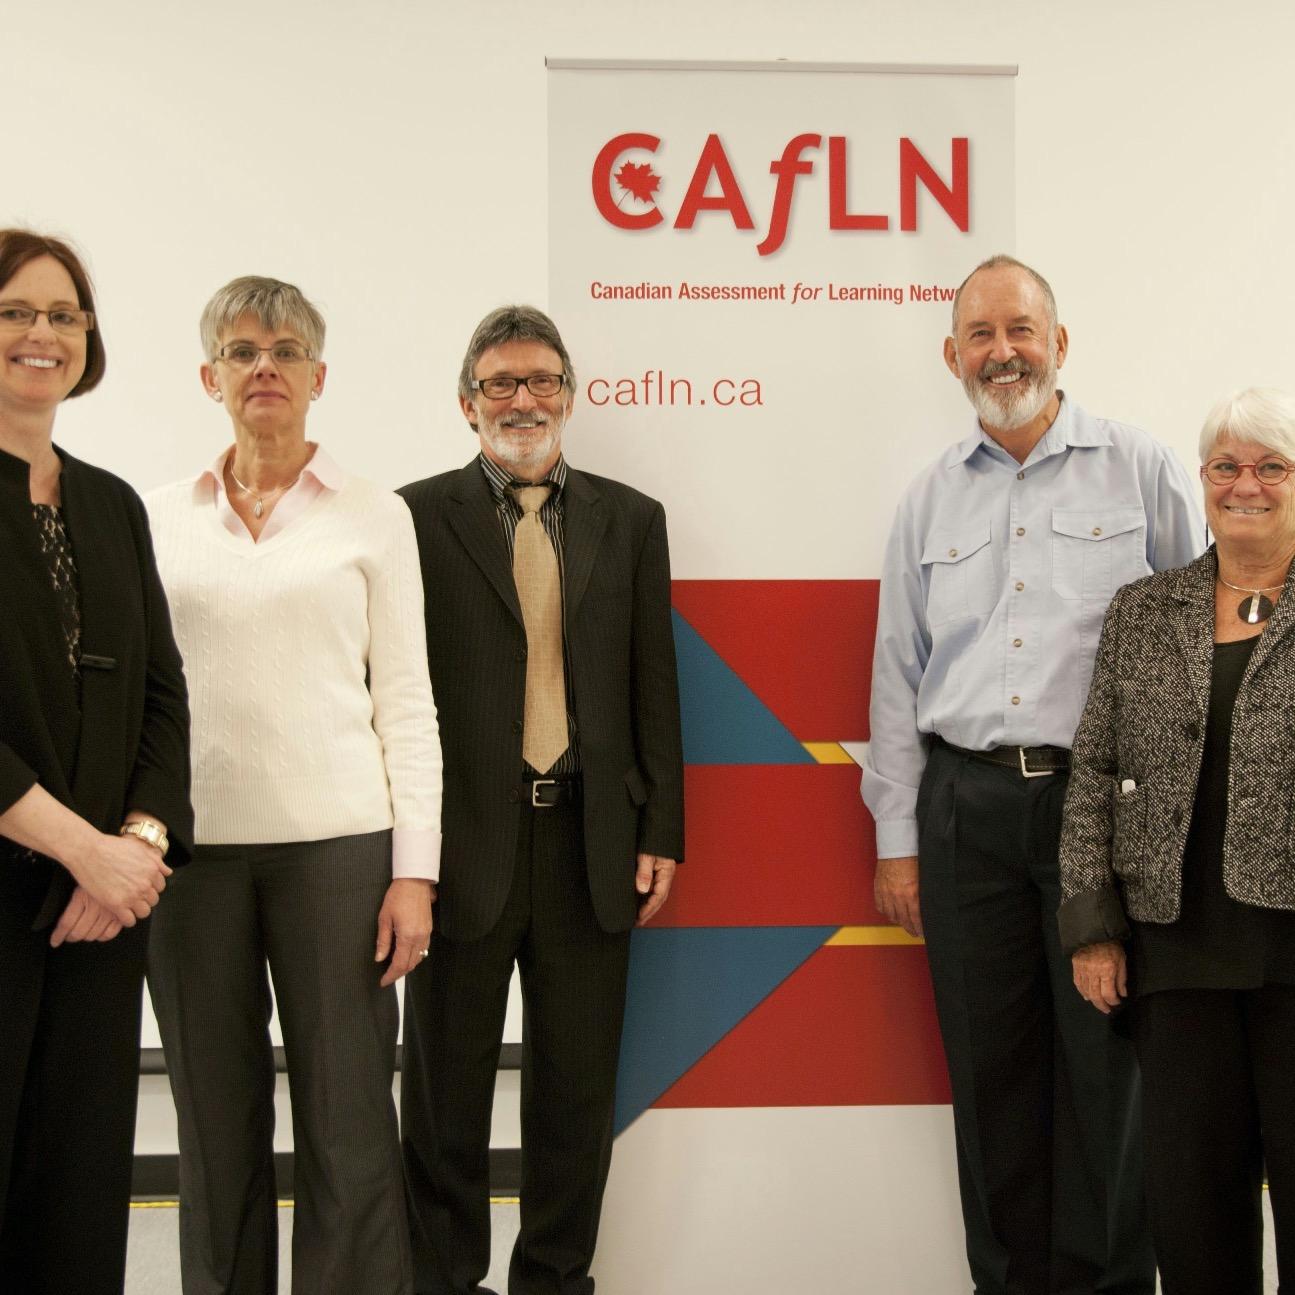 The Canadian Assessment for Learning Network (CAfLN) provides a forum for sharing and mobilizing knowledge about Assessment for Learning (AfL)